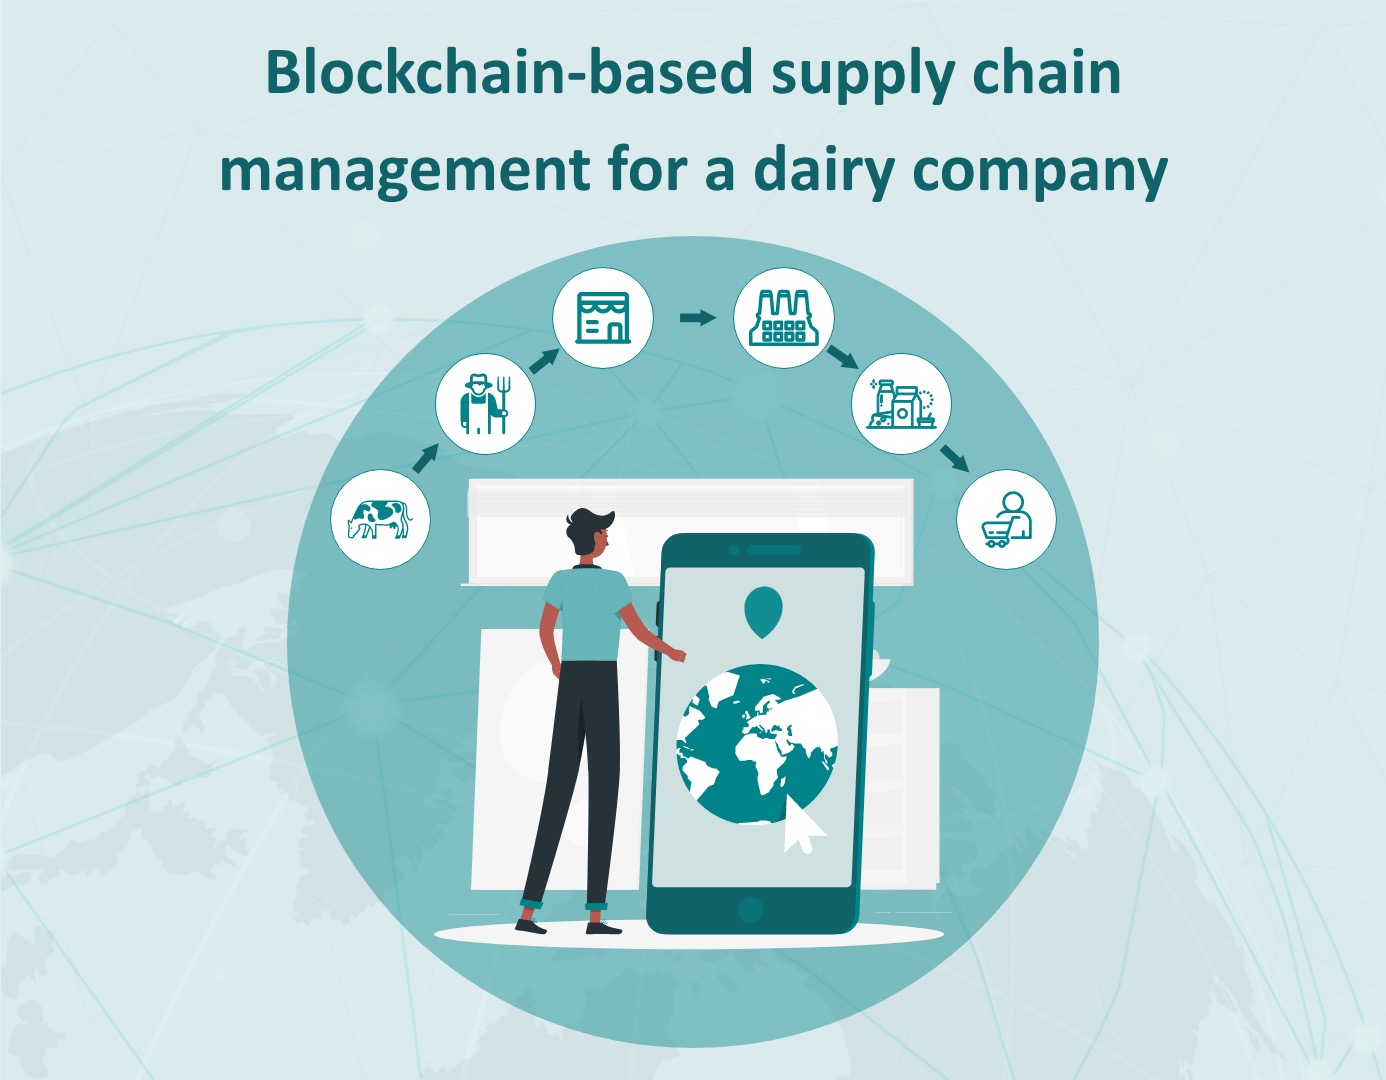 Blockchain-based supply chain management for a dairy company